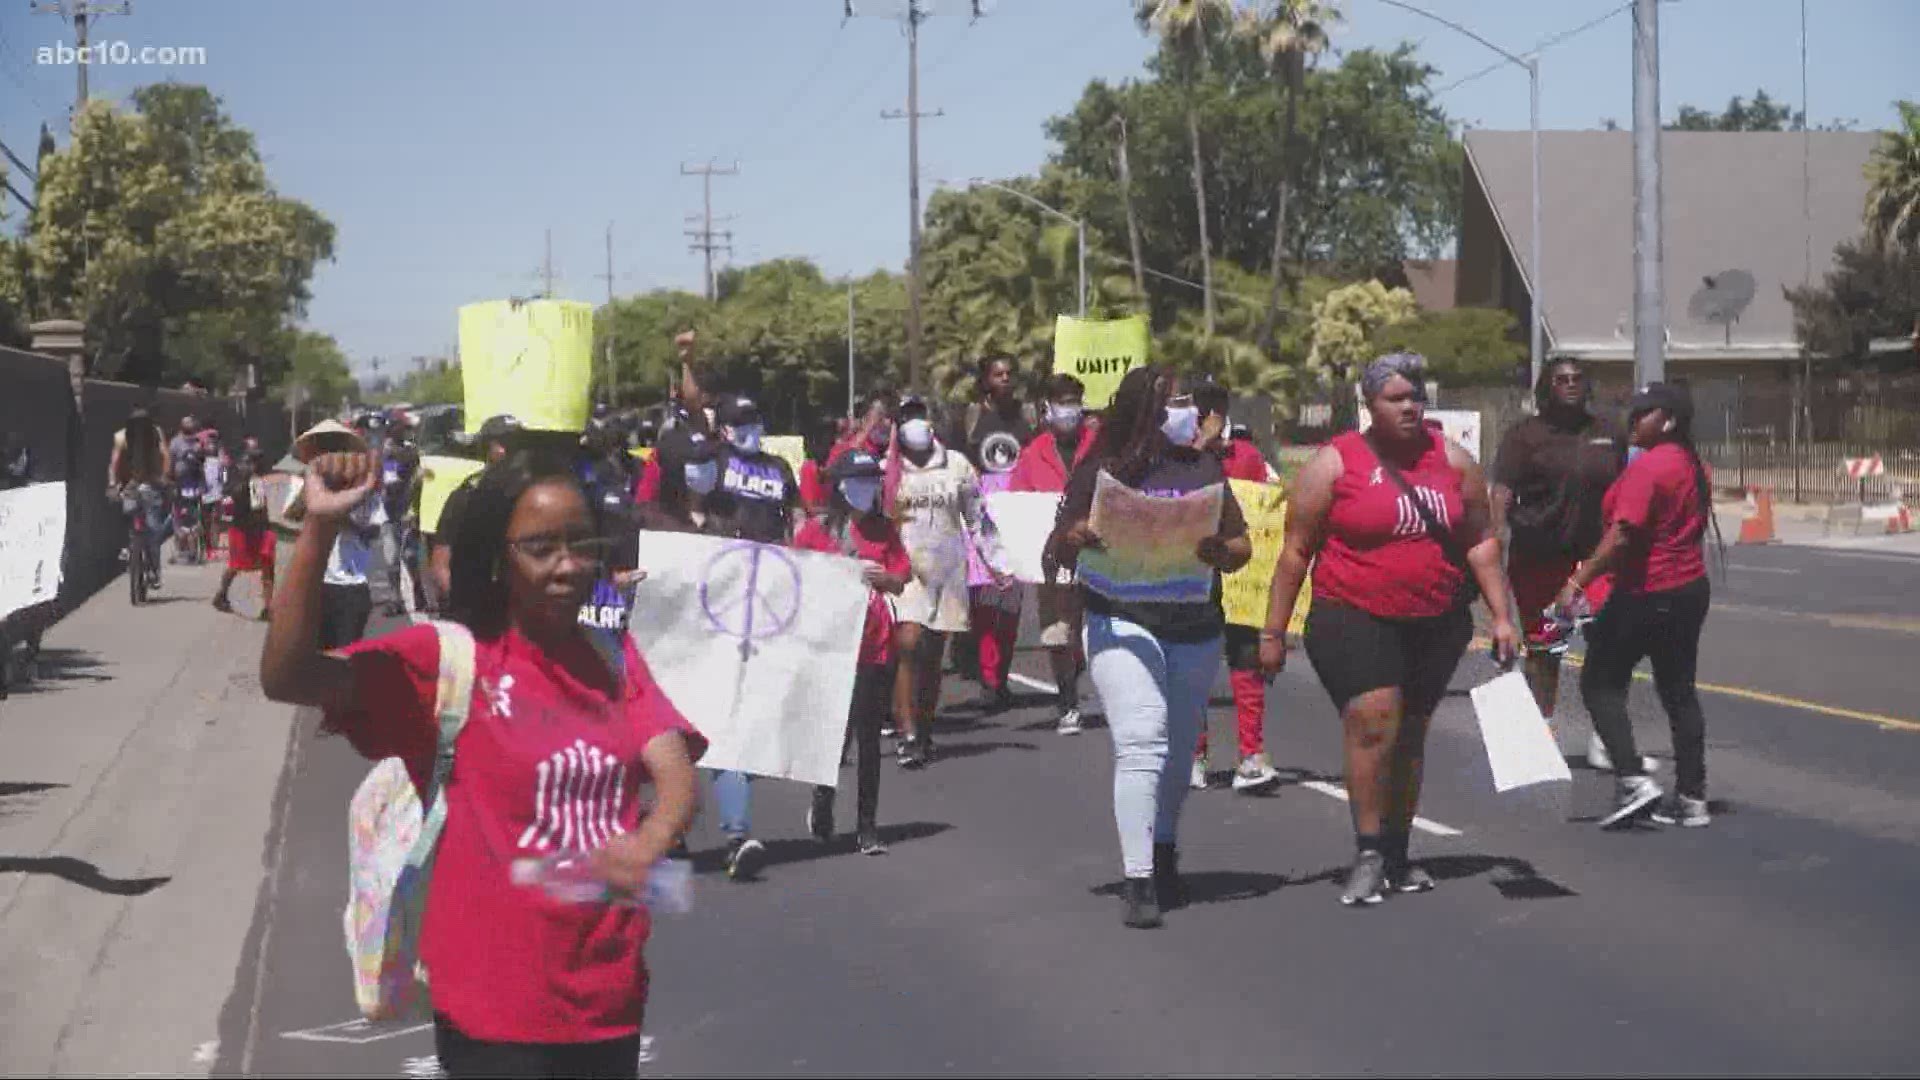 Rather than marching to the Capitol or the police department, the steps forward were taken on the streets of their own neighborhood along Meadowview Road.